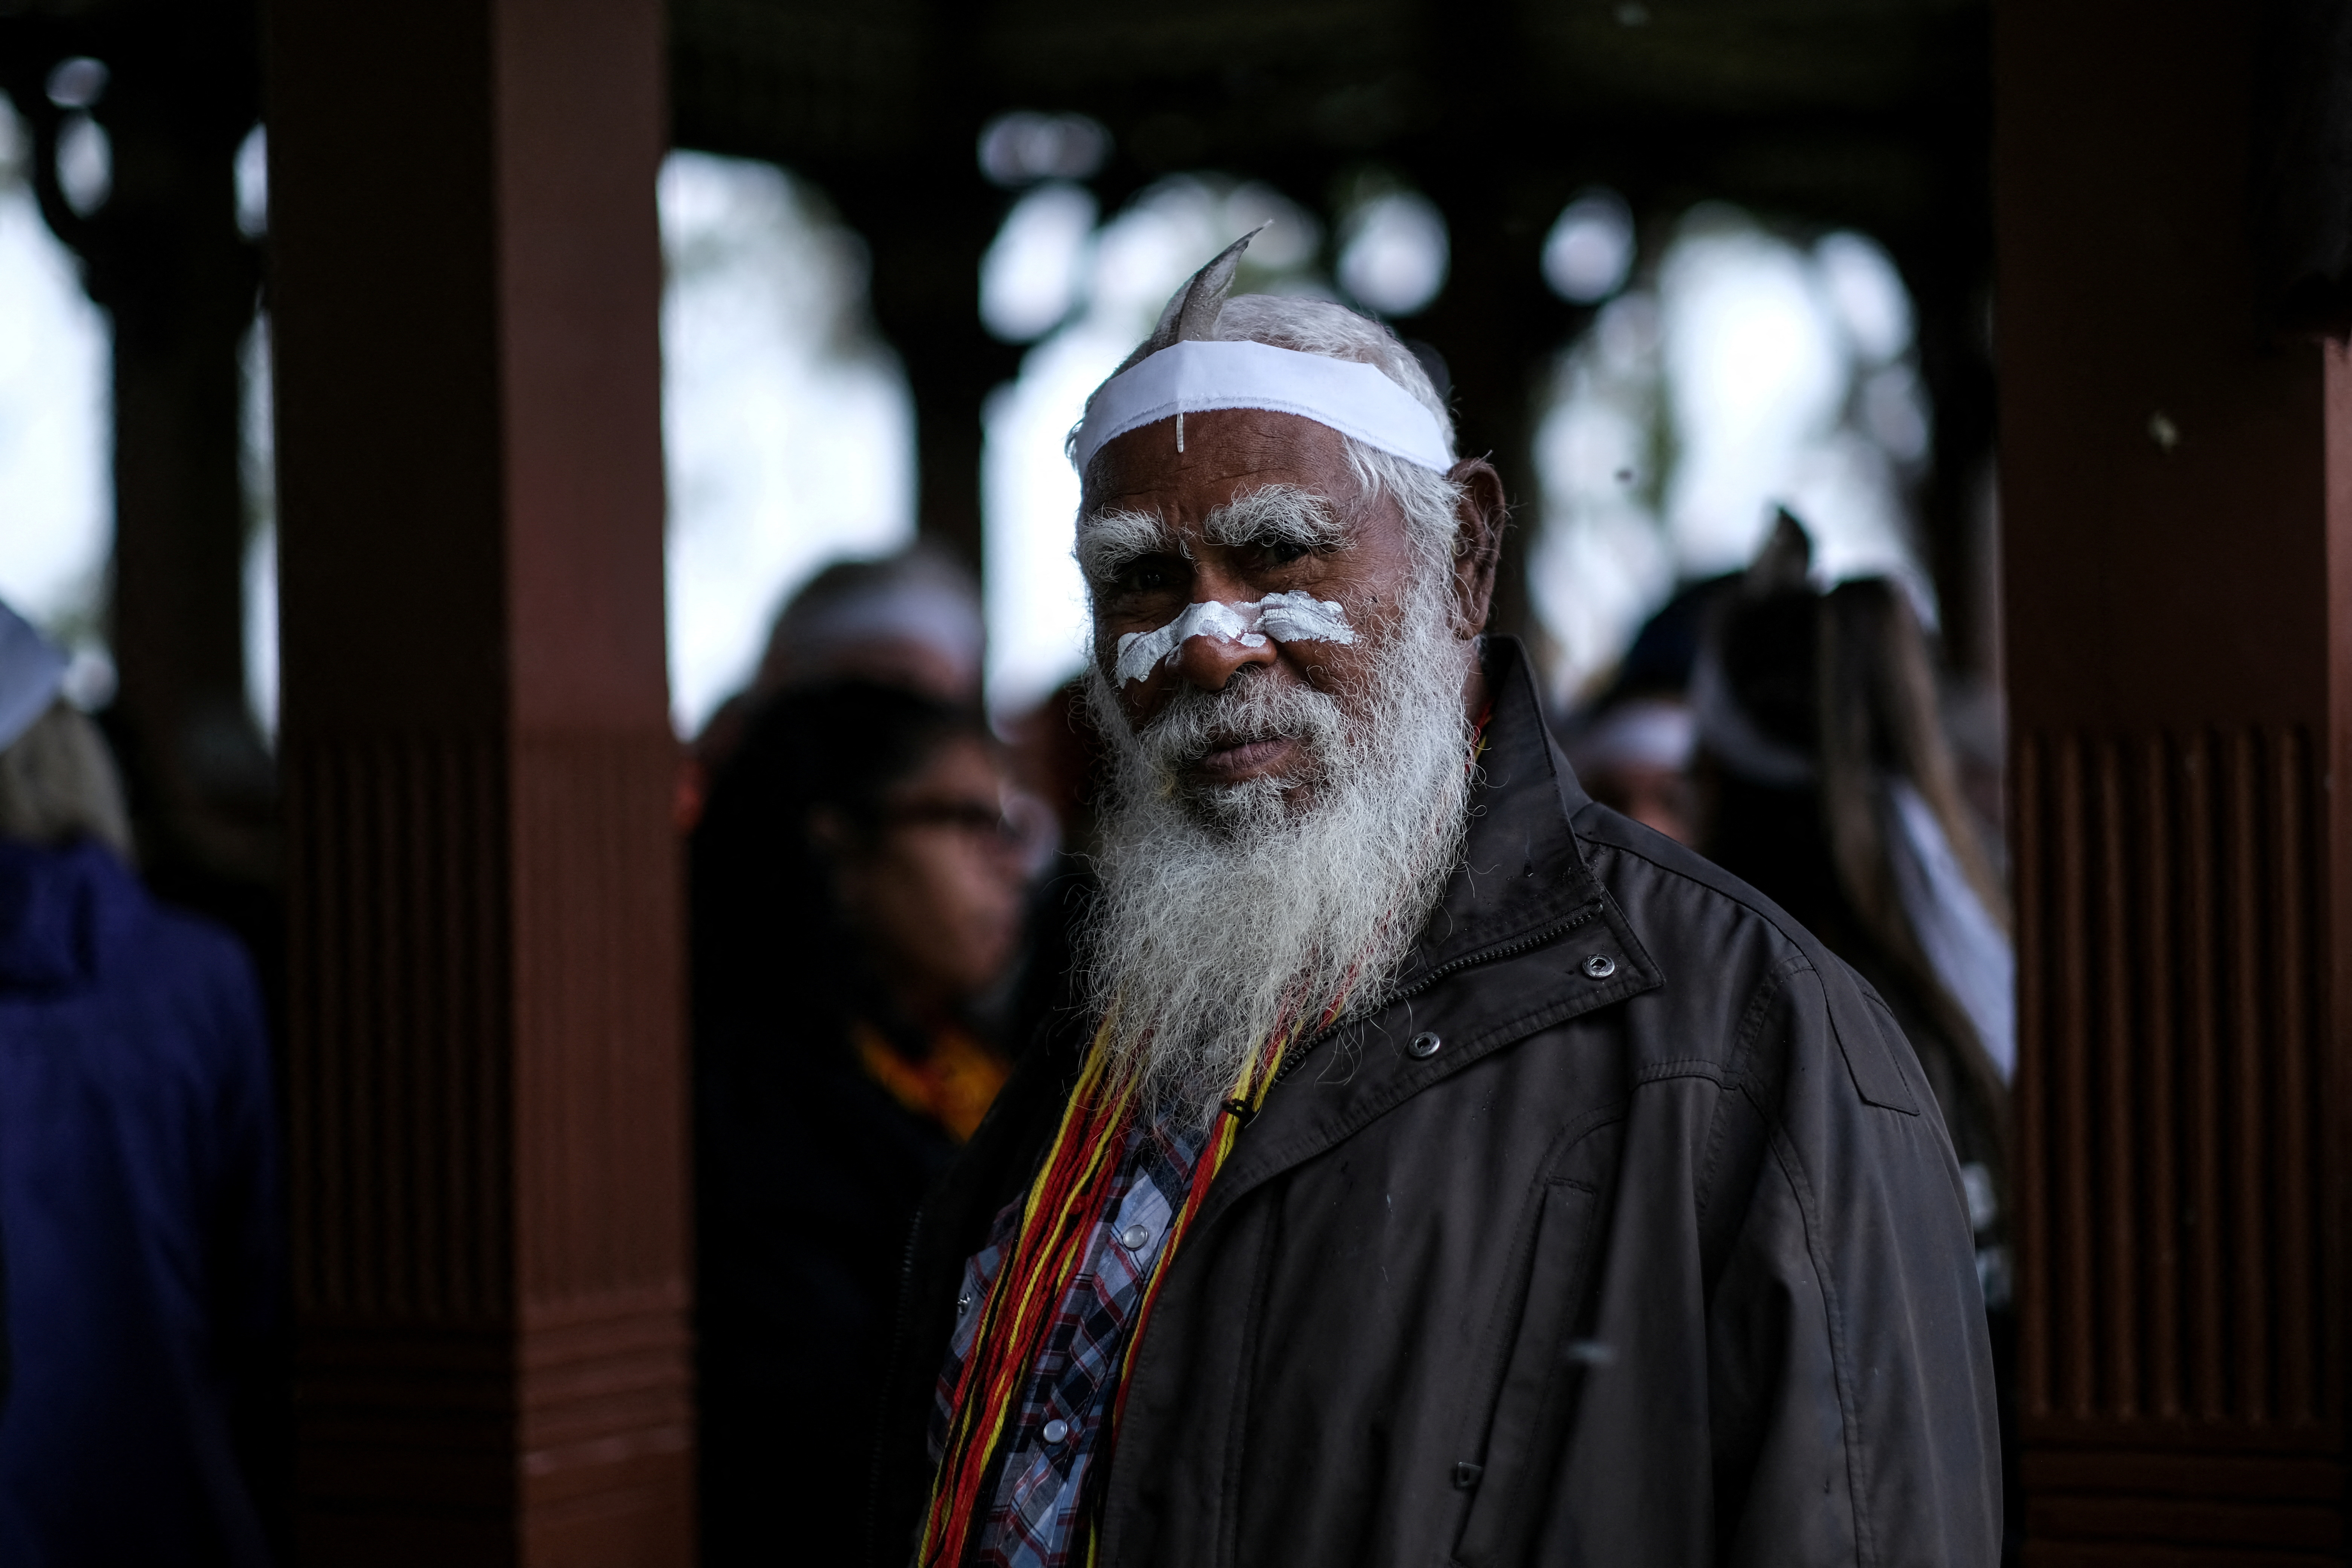 Aboriginal groups march against planned changes in heritage protection laws, in Perth